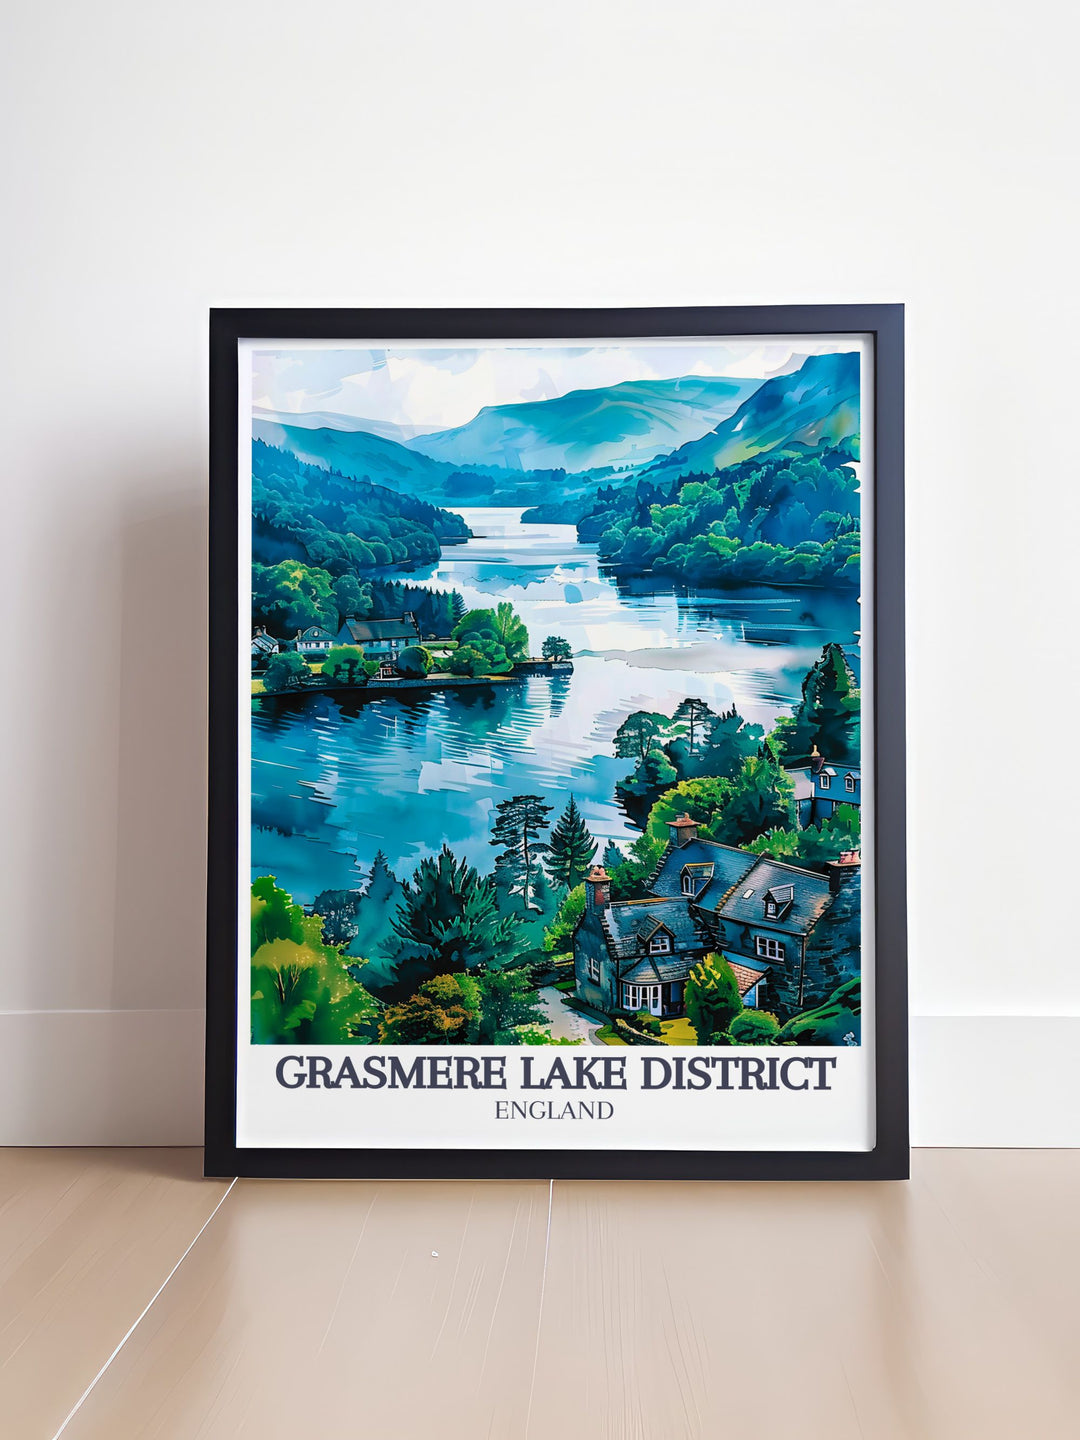 Featuring a detailed illustration of Grasmere Lake and the village, this wall art captures the natural and cultural beauty of the Lake District, England, ideal for enhancing your decor.